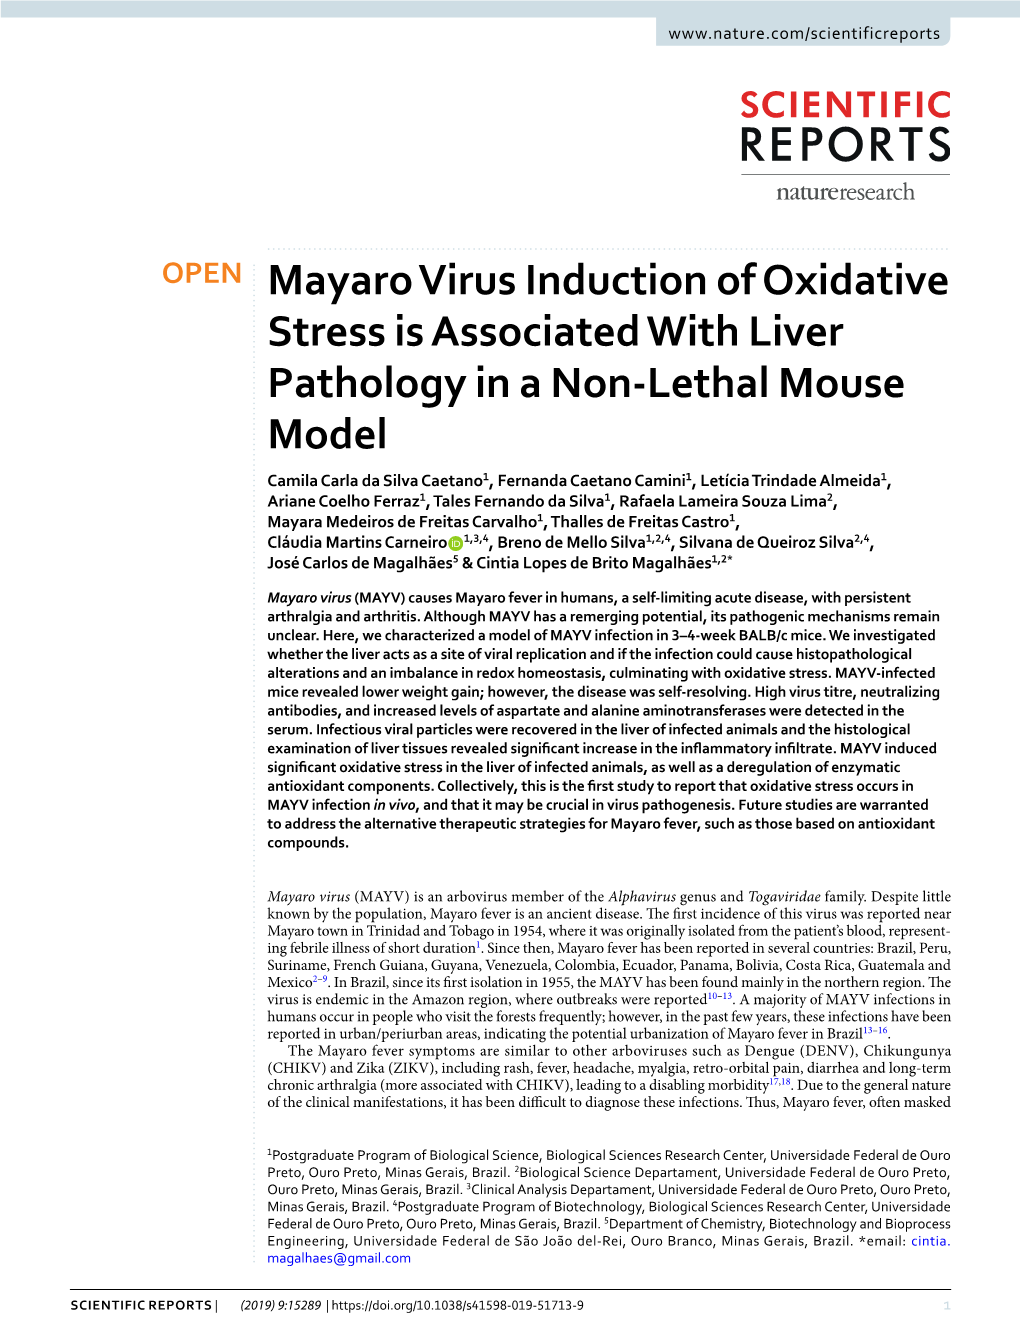 Mayaro Virus Induction of Oxidative Stress Is Associated with Liver Pathology in a Non-Lethal Mouse Model